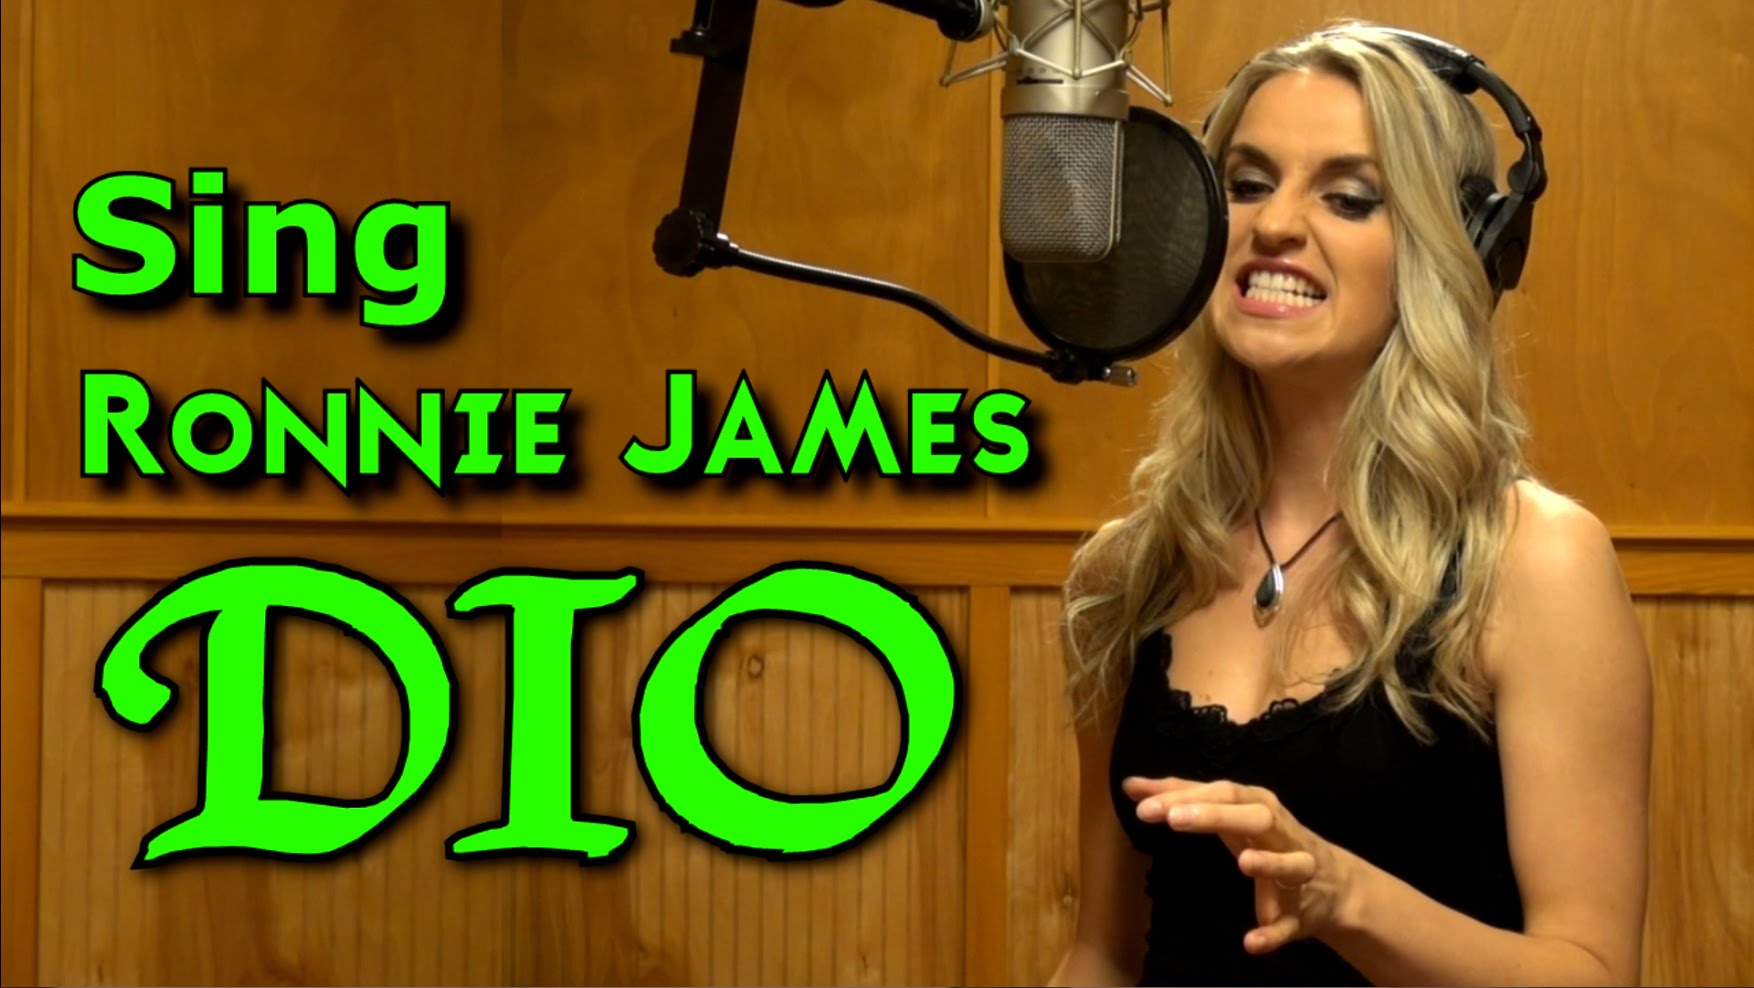 Talented singer teaches how to sing like Ronnie James Dio